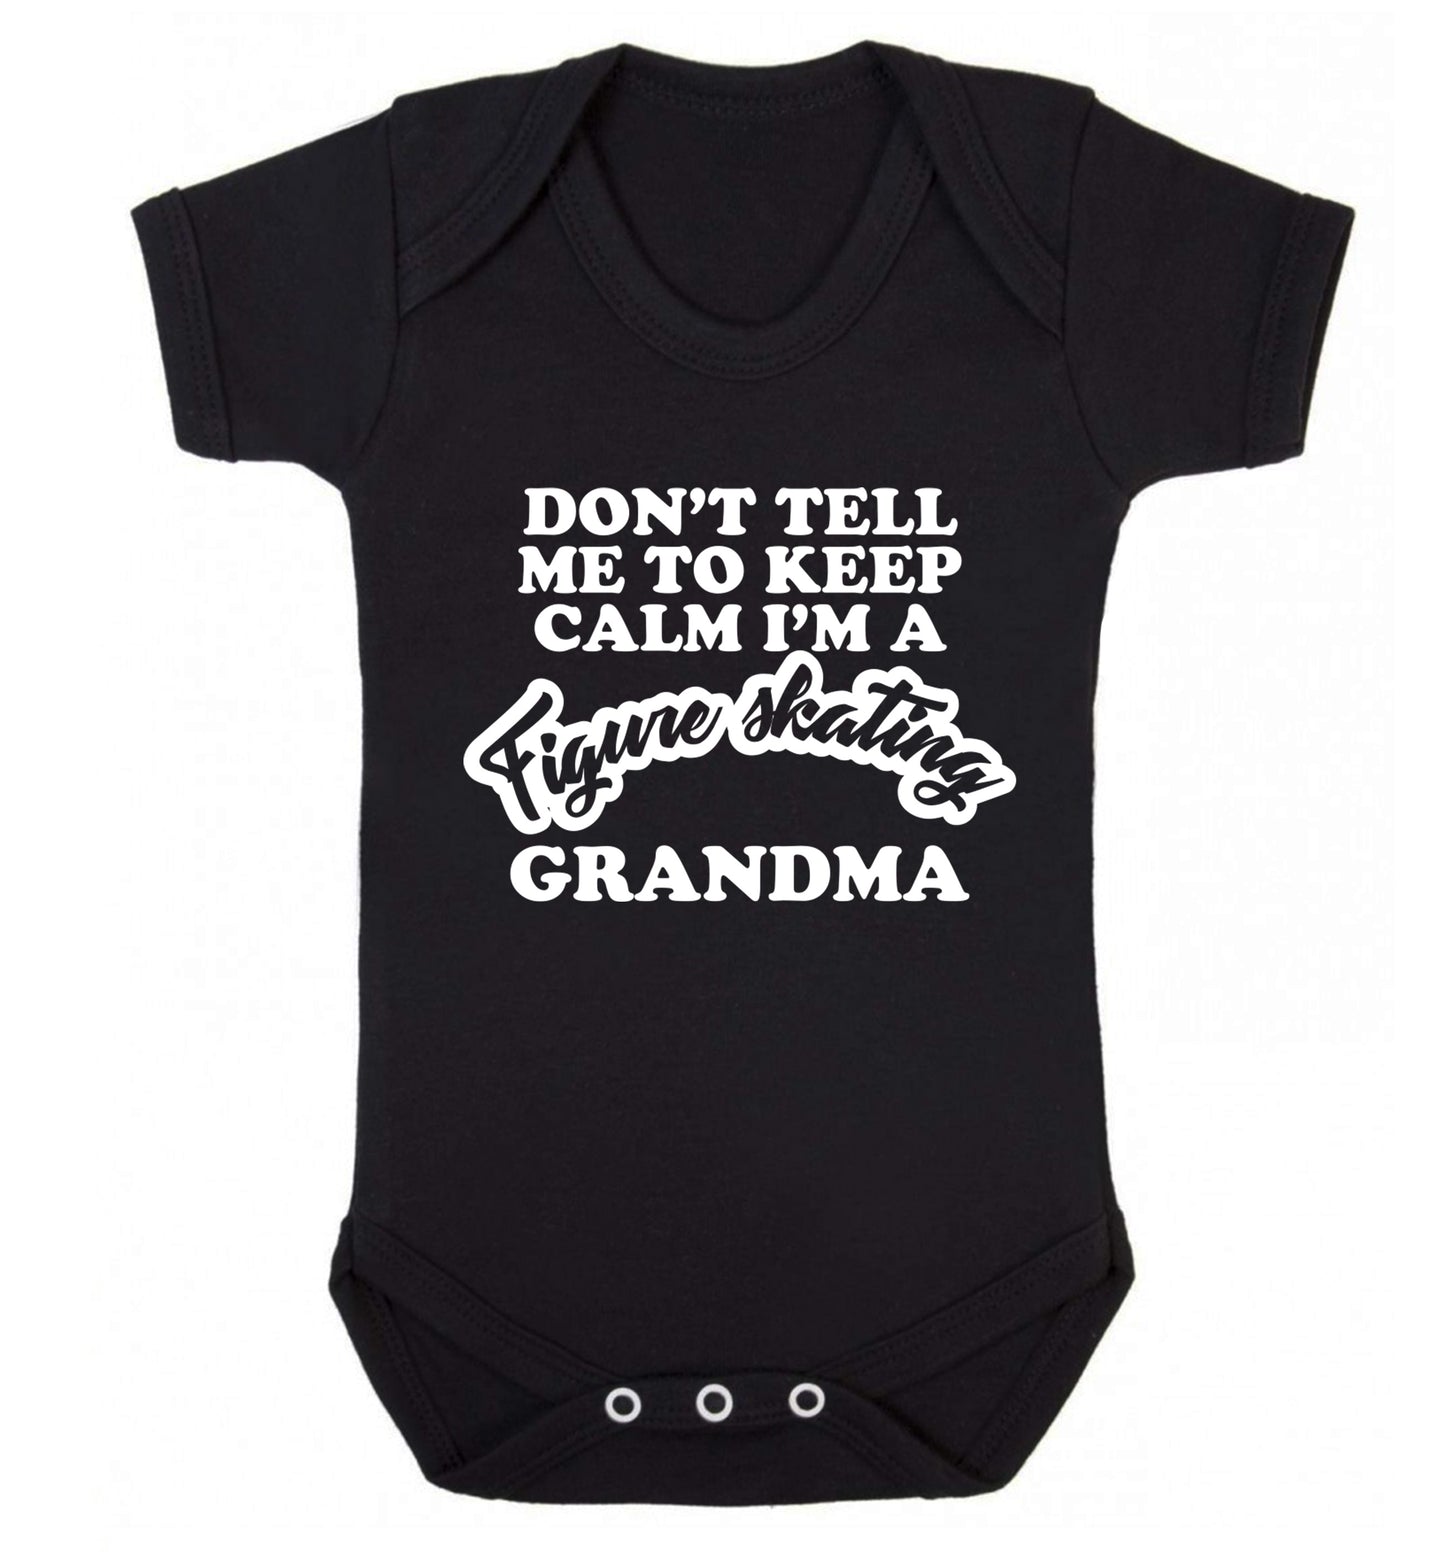 Don't tell me to keep calm I'm a figure skating grandma Baby Vest black 18-24 months